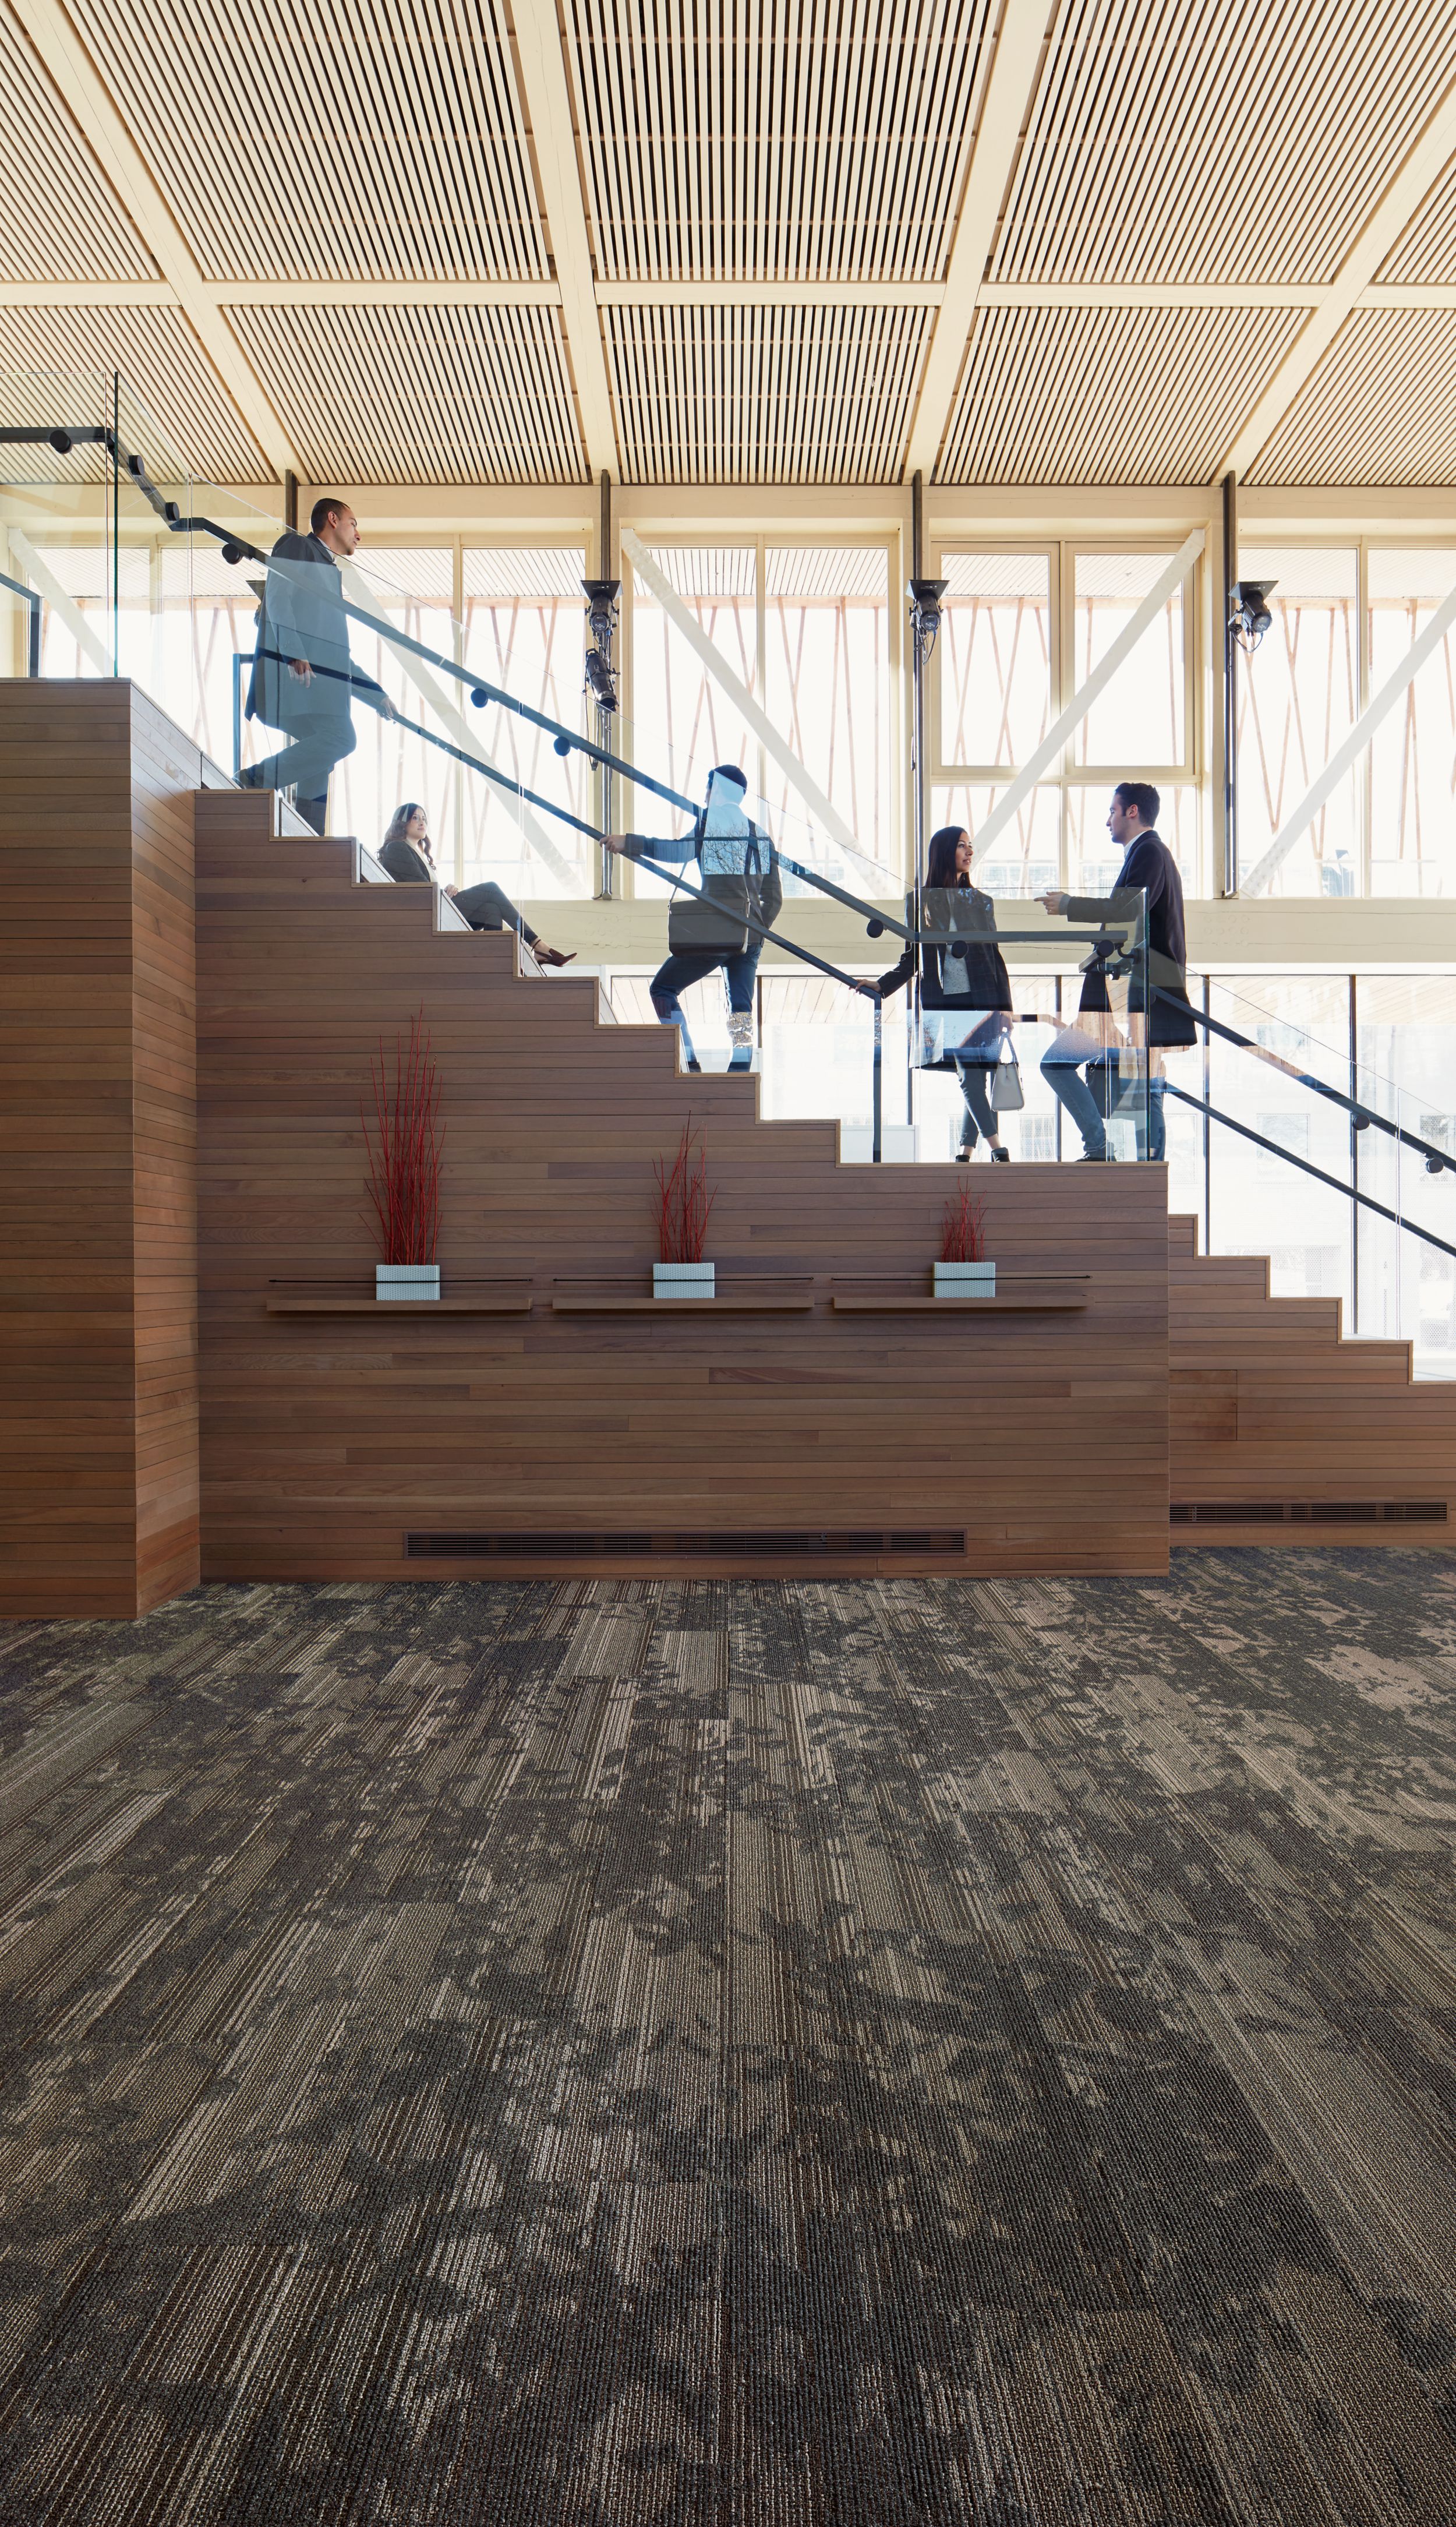 Interface Glazing plank carpet tile with wooden staircase in background imagen número 1